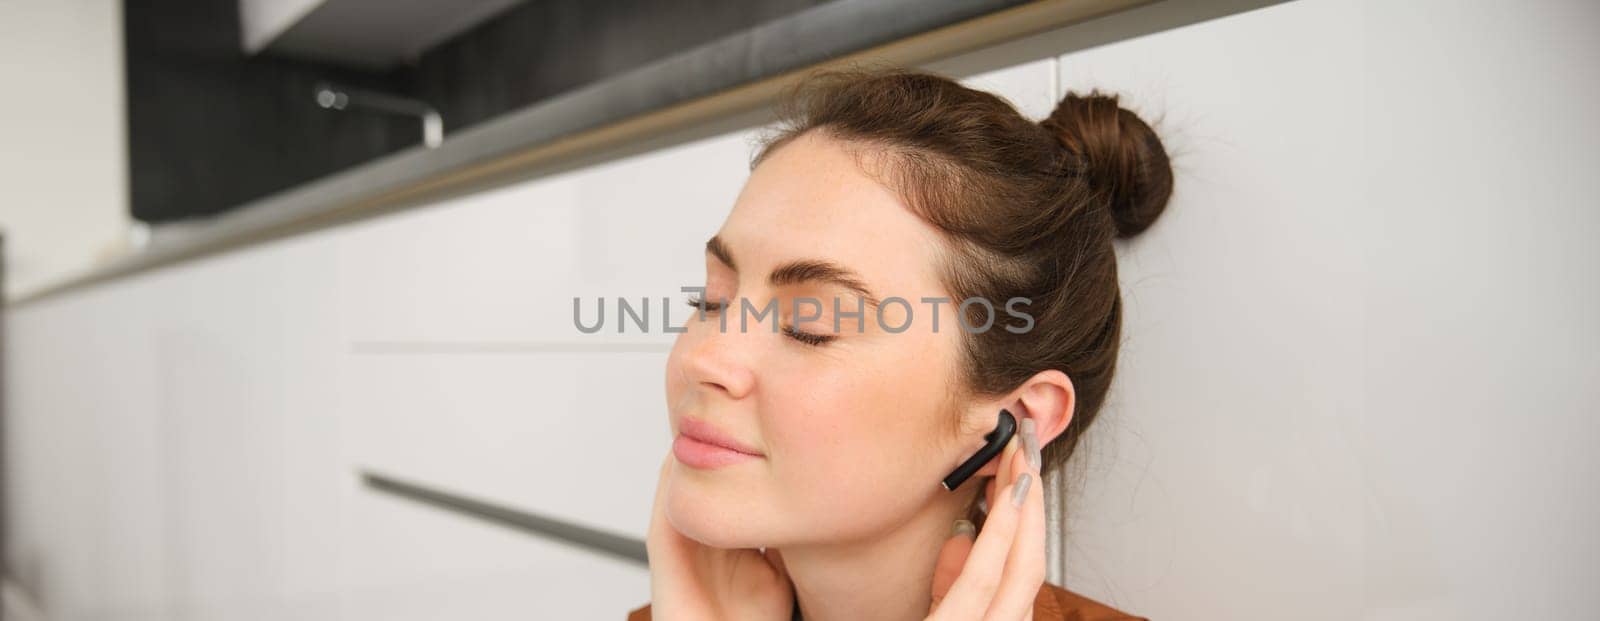 Portrait of young smiling woman listens to music in her black wireless earphones, using headphones to enjoy sound quality of song, sits on kitchen floor.